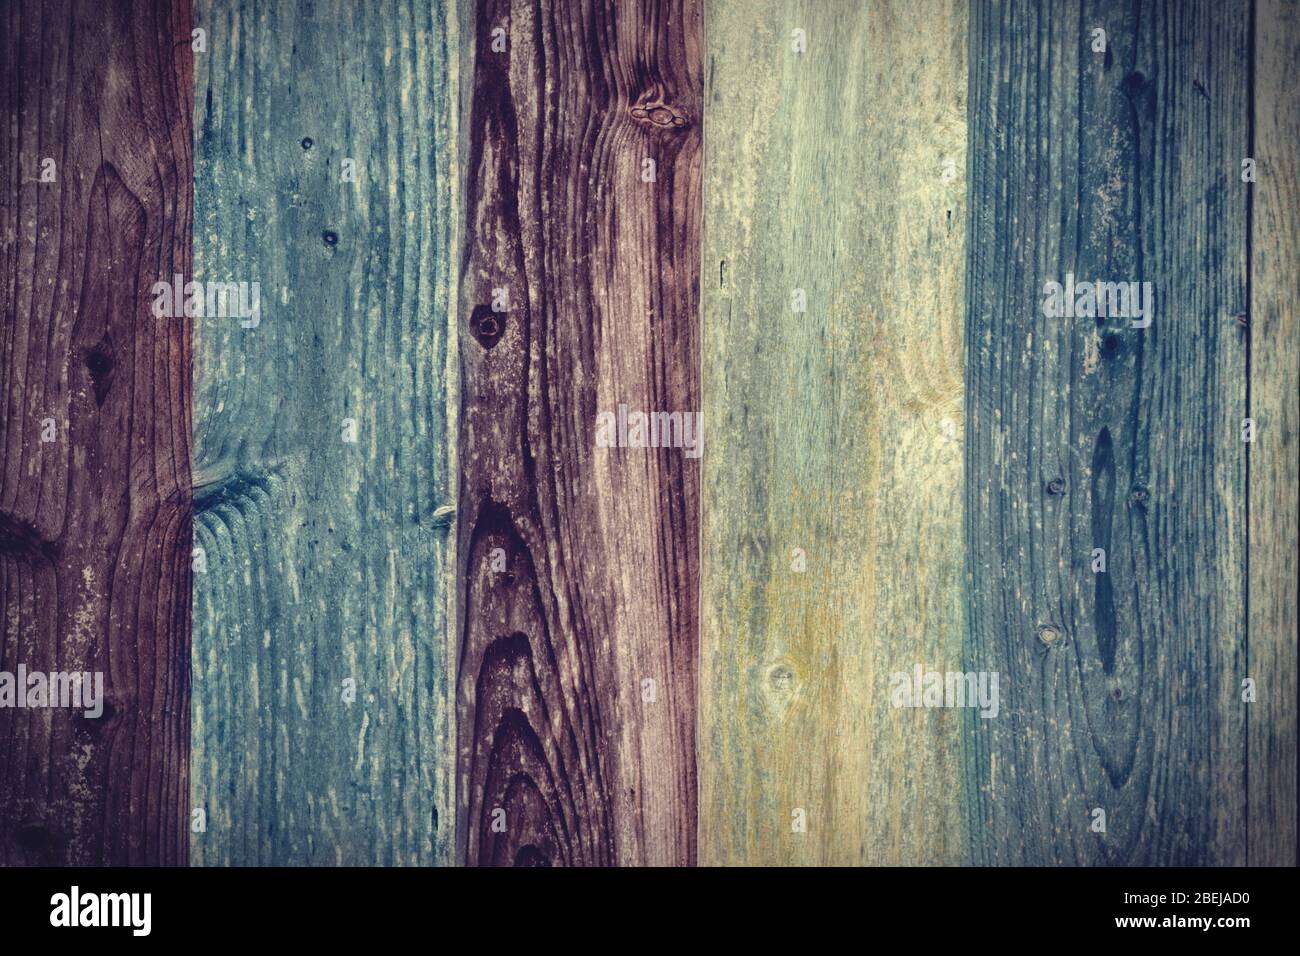 Abstract background of wooden slats Stock Photo